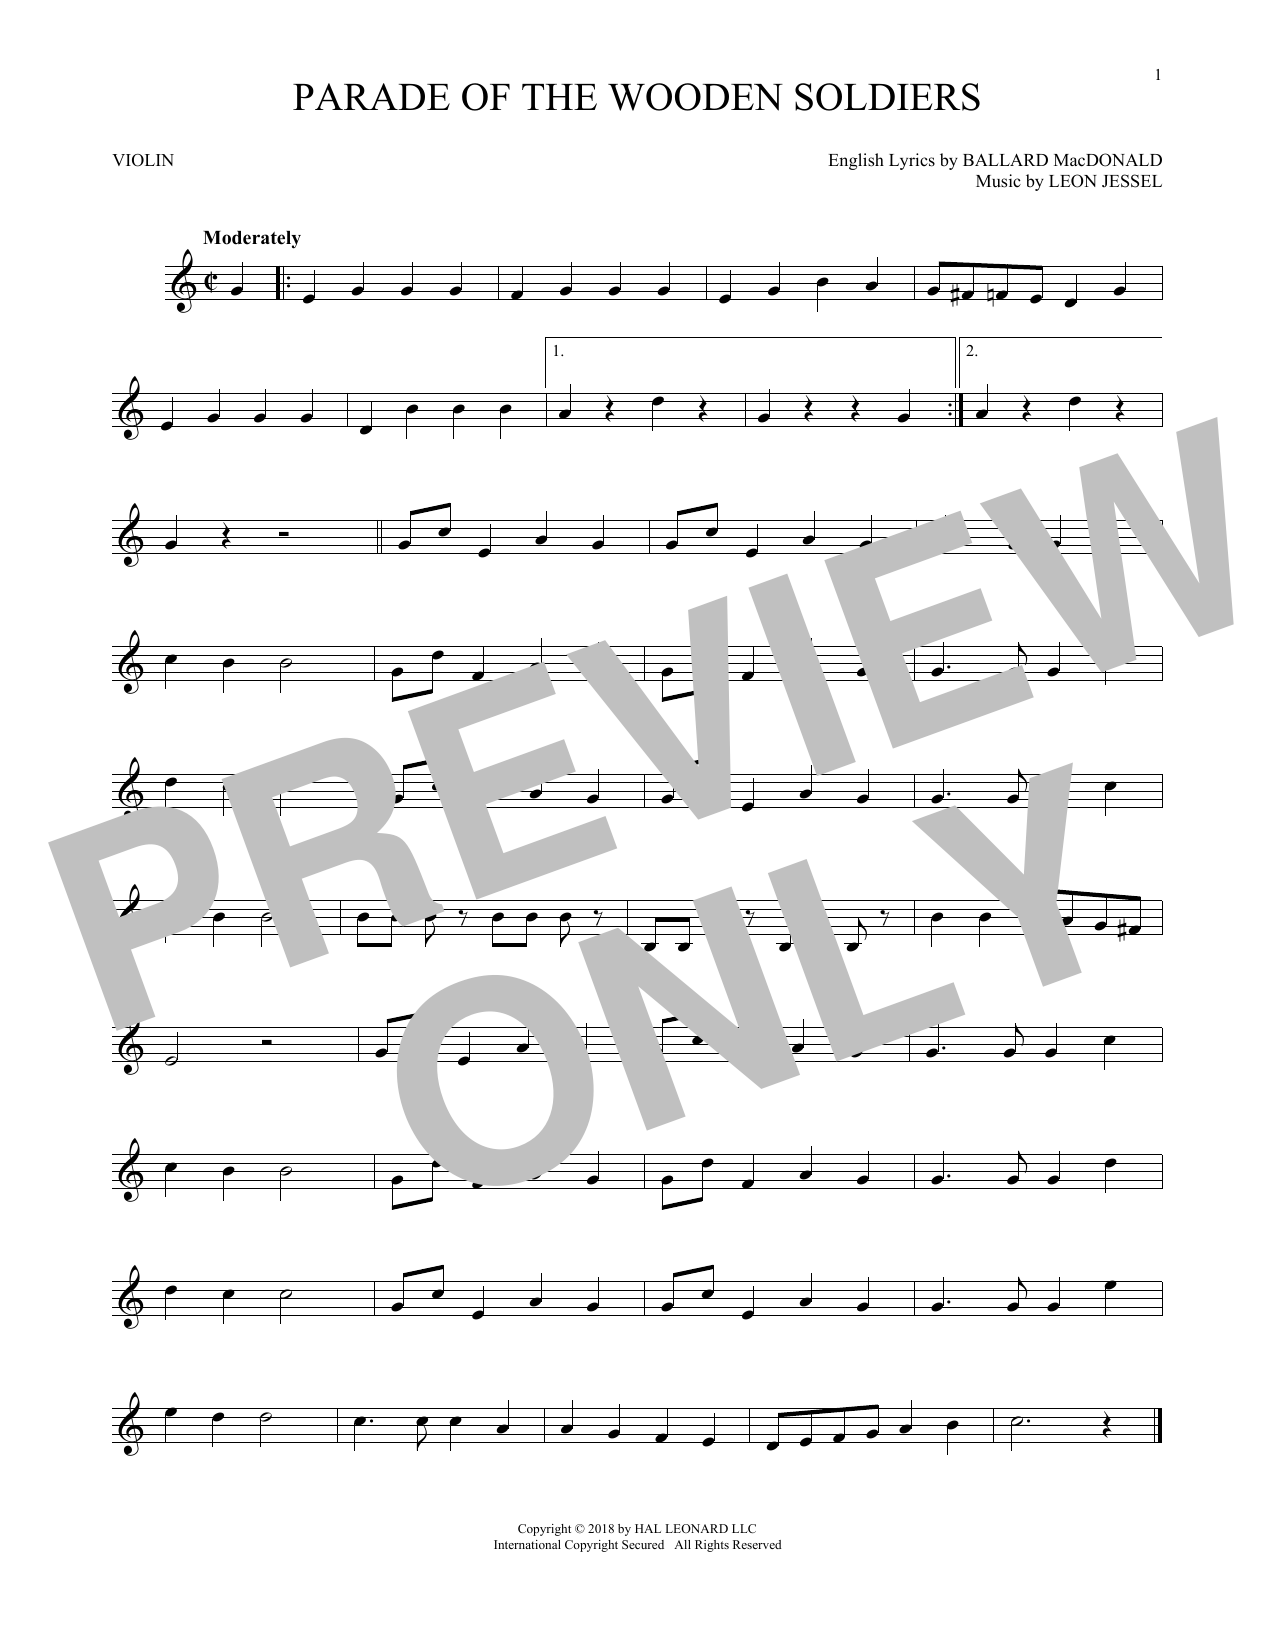 Download Ballard MacDonald and Leon Jessel Parade Of The Wooden Soldiers Sheet Music